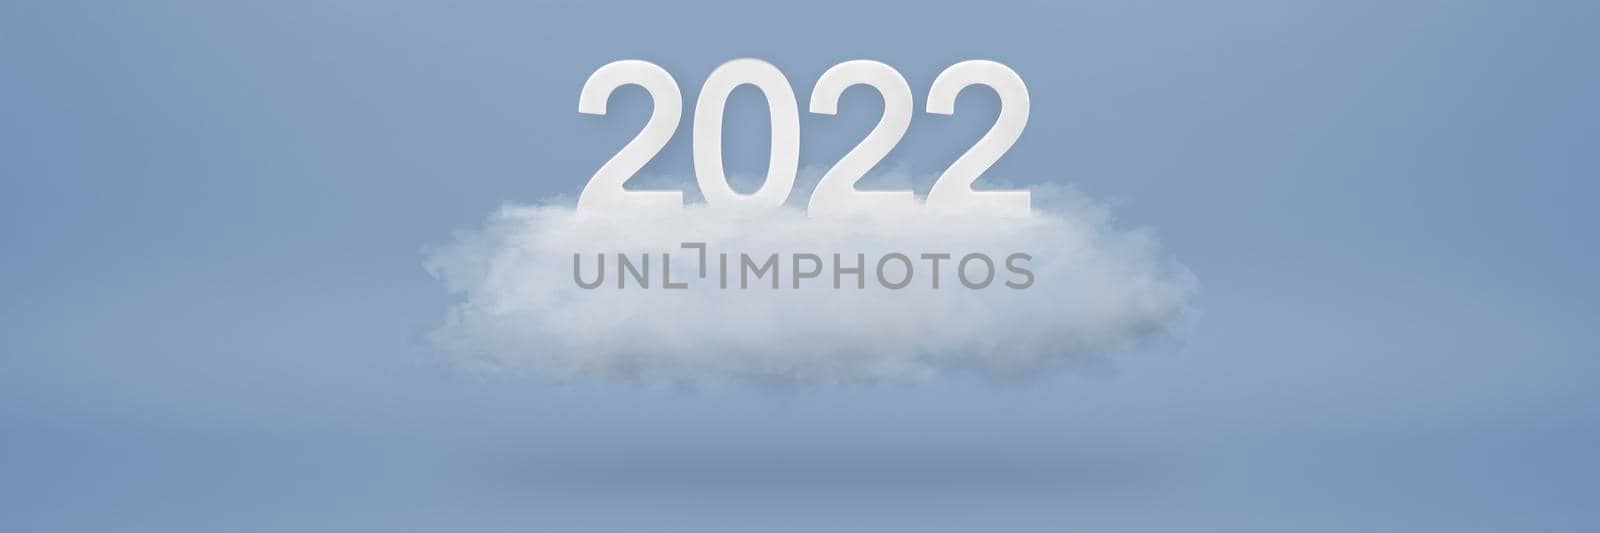 Happy New Year 2022 greeting template. Festive 3d banner with white numbers 2022 on white cloud and blue background. Festive poster,calendar or banner design